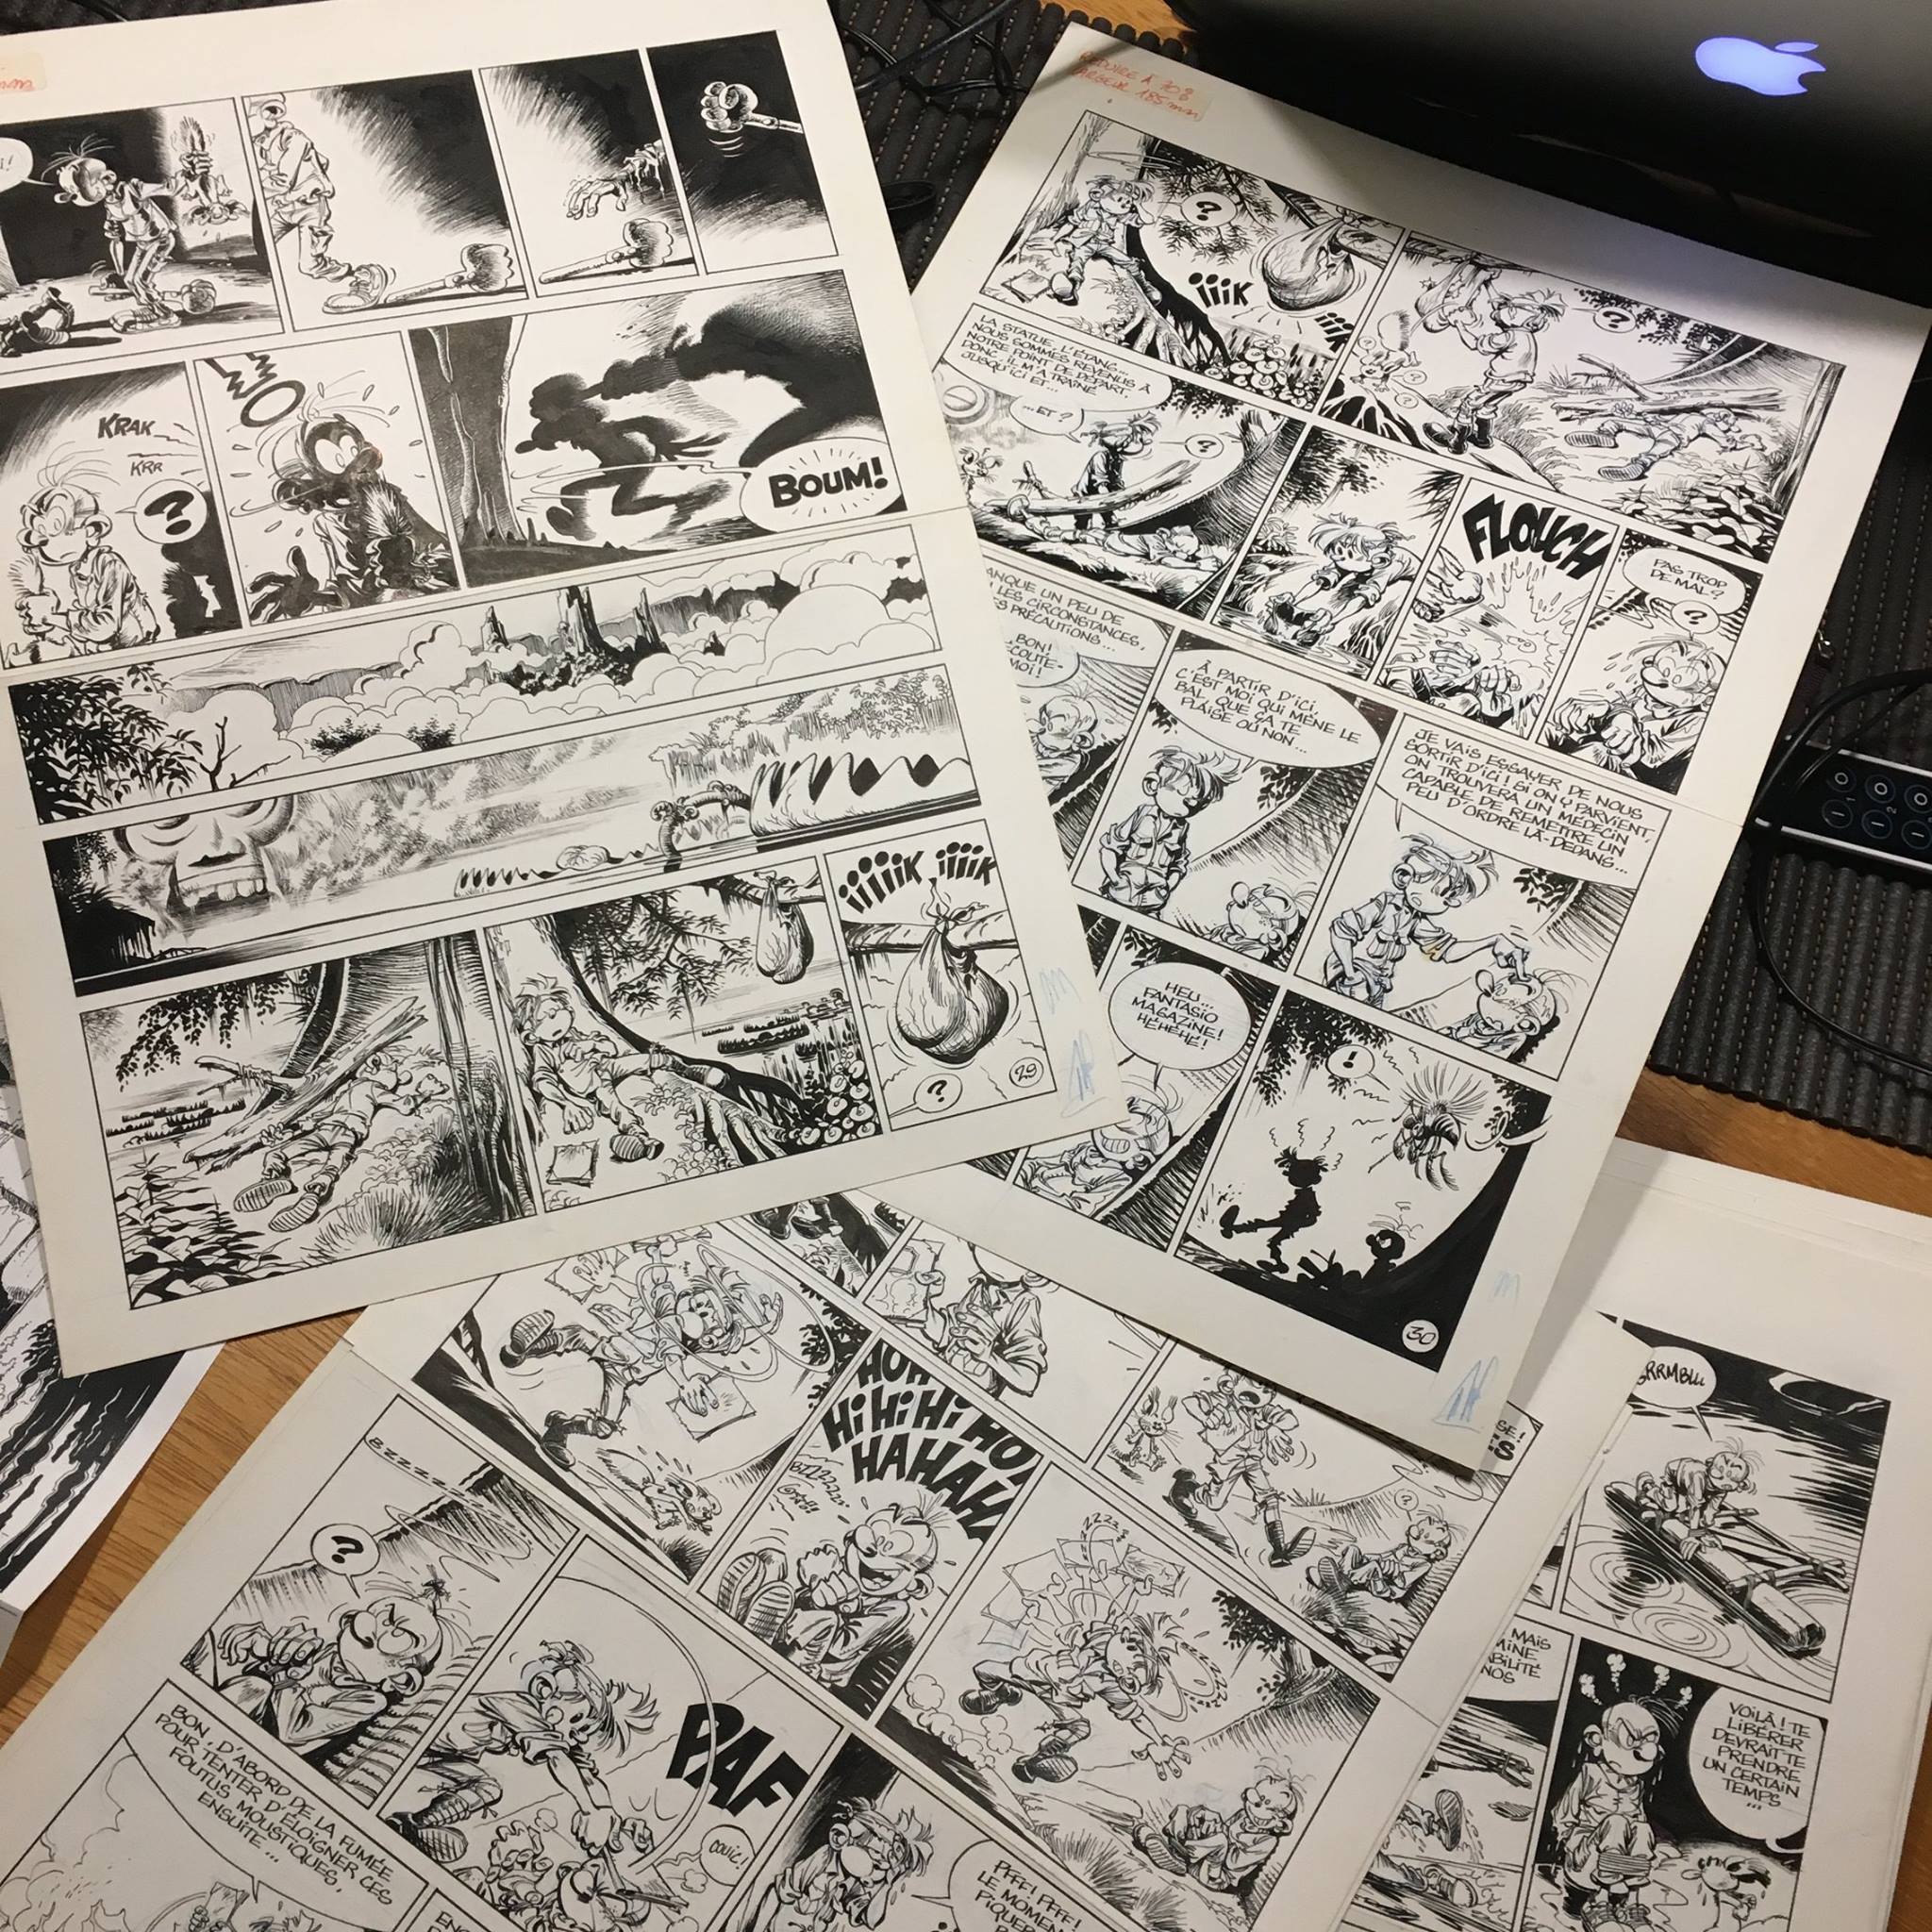 Original pages by Janry, from Spirou & Fantasio #41, 'La vallée des bannis' (ill. Tome & Janry; photo by Éditions Black & White; image from facebook.com/Editions-Black-White-320137321419027)